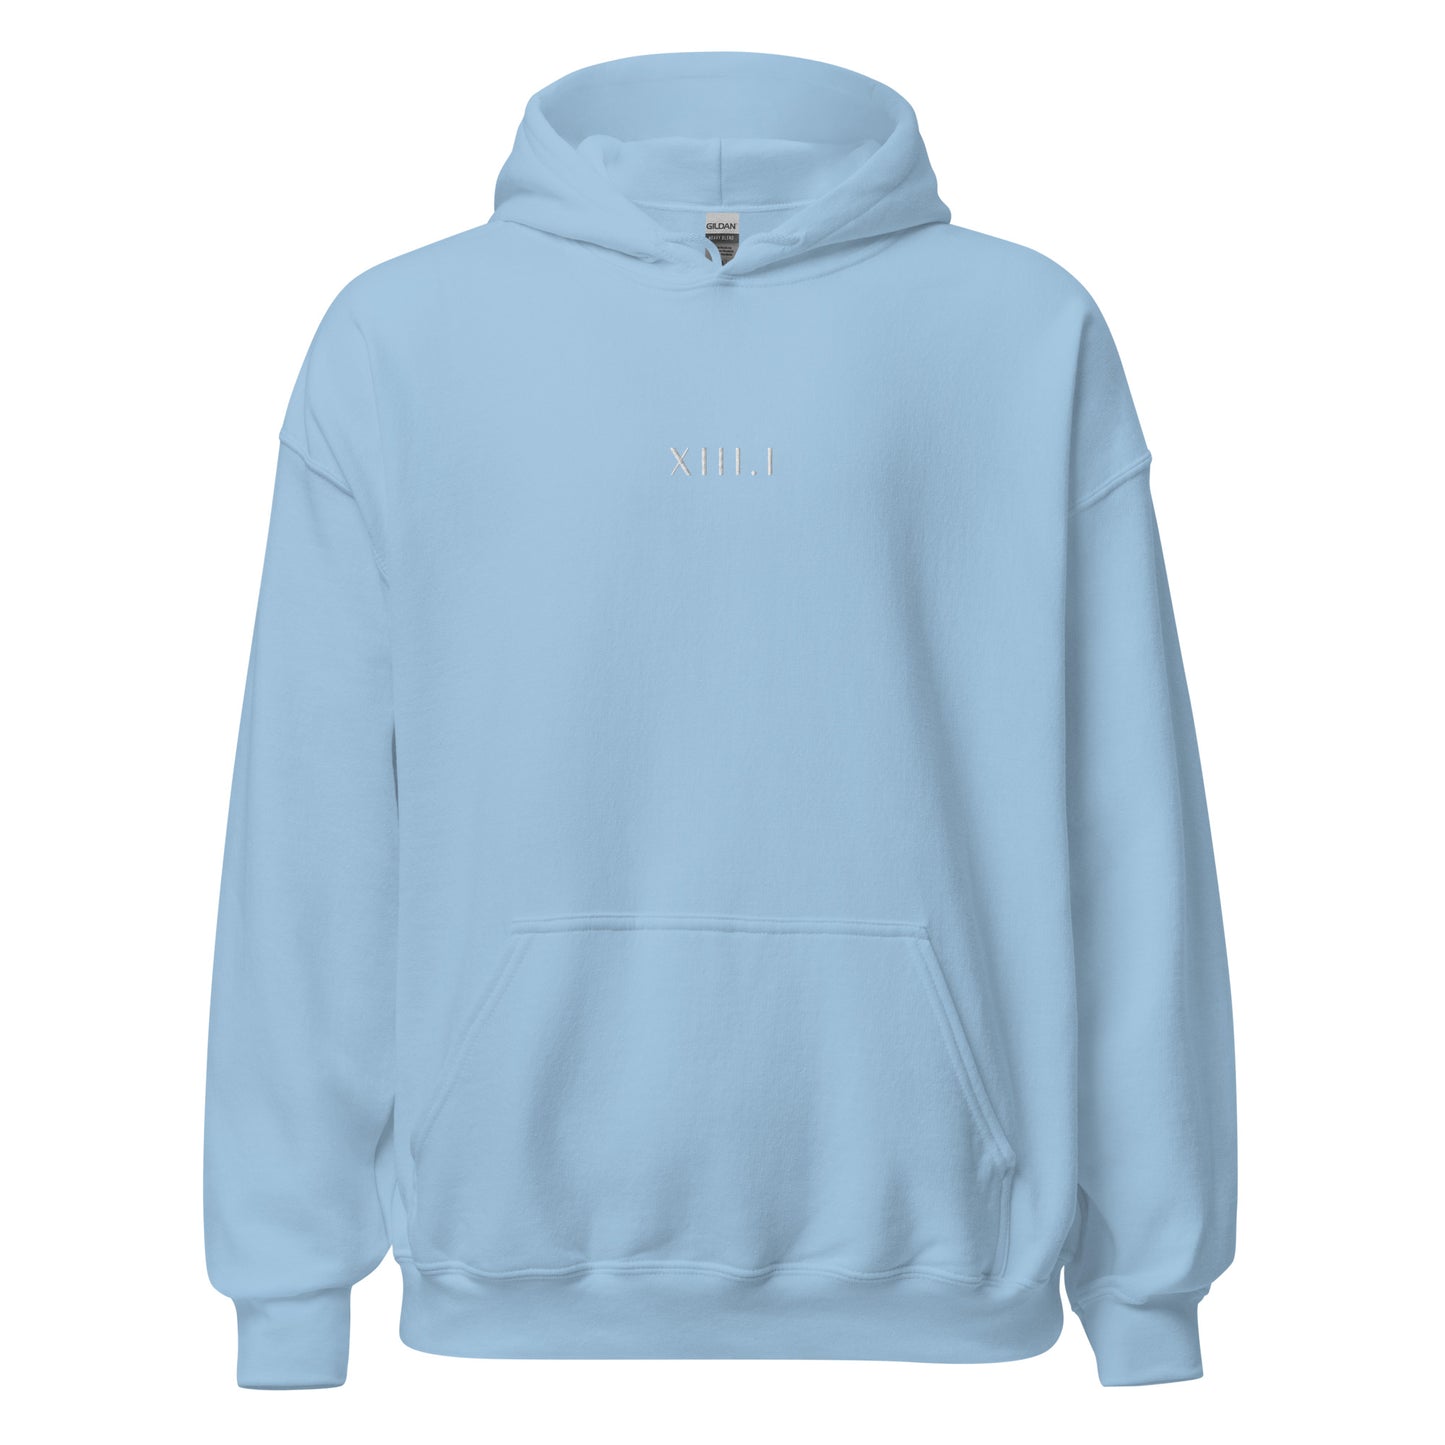 light blue unisex hoodie with XIII.I 13.1 half marathon in roman numerals embroidered in white writing